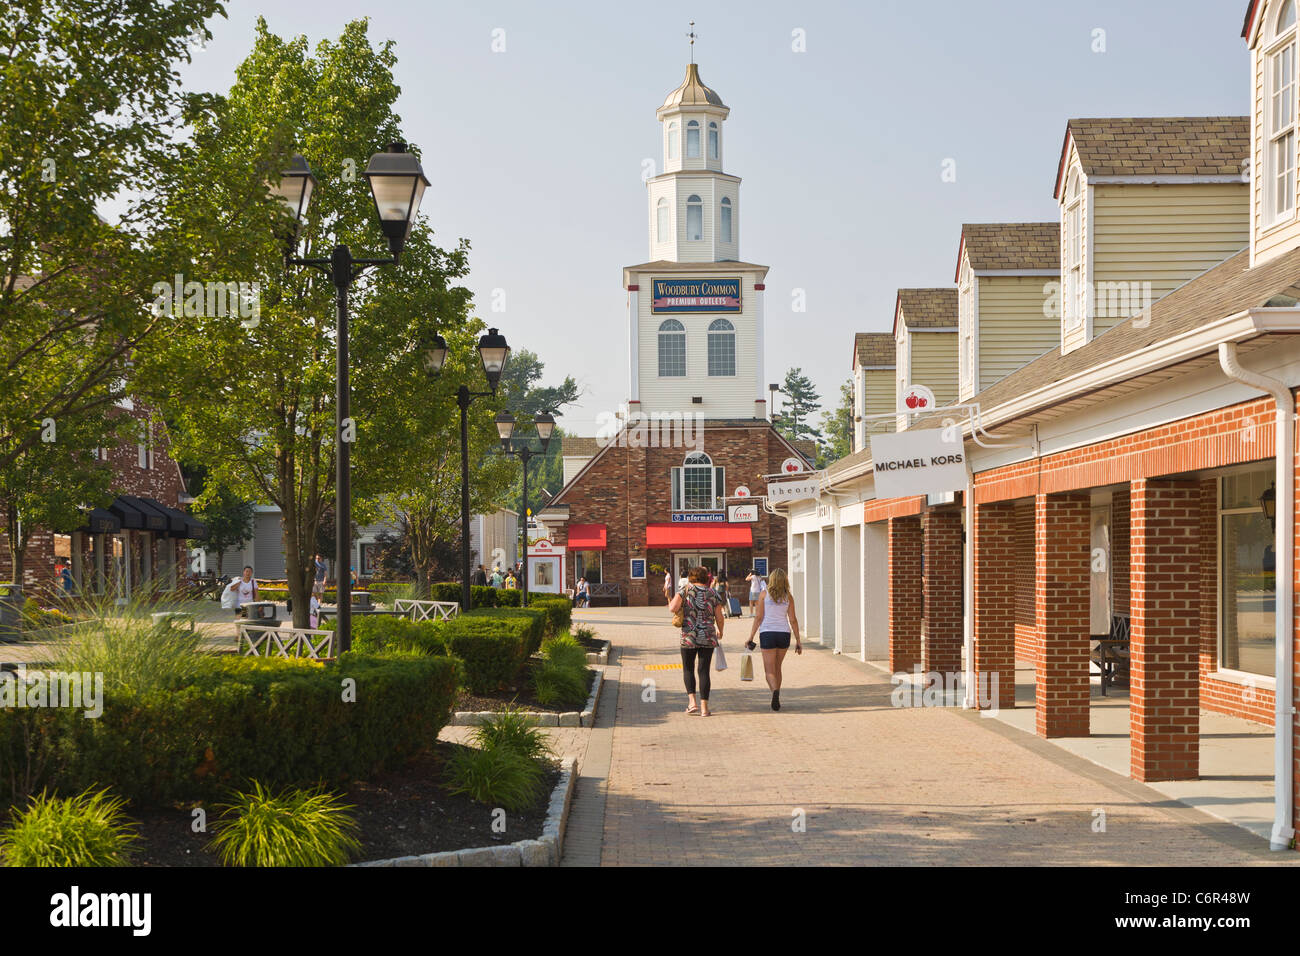 Woodbury Common Premium Outlets Announces New Dining Choices for Shoppers